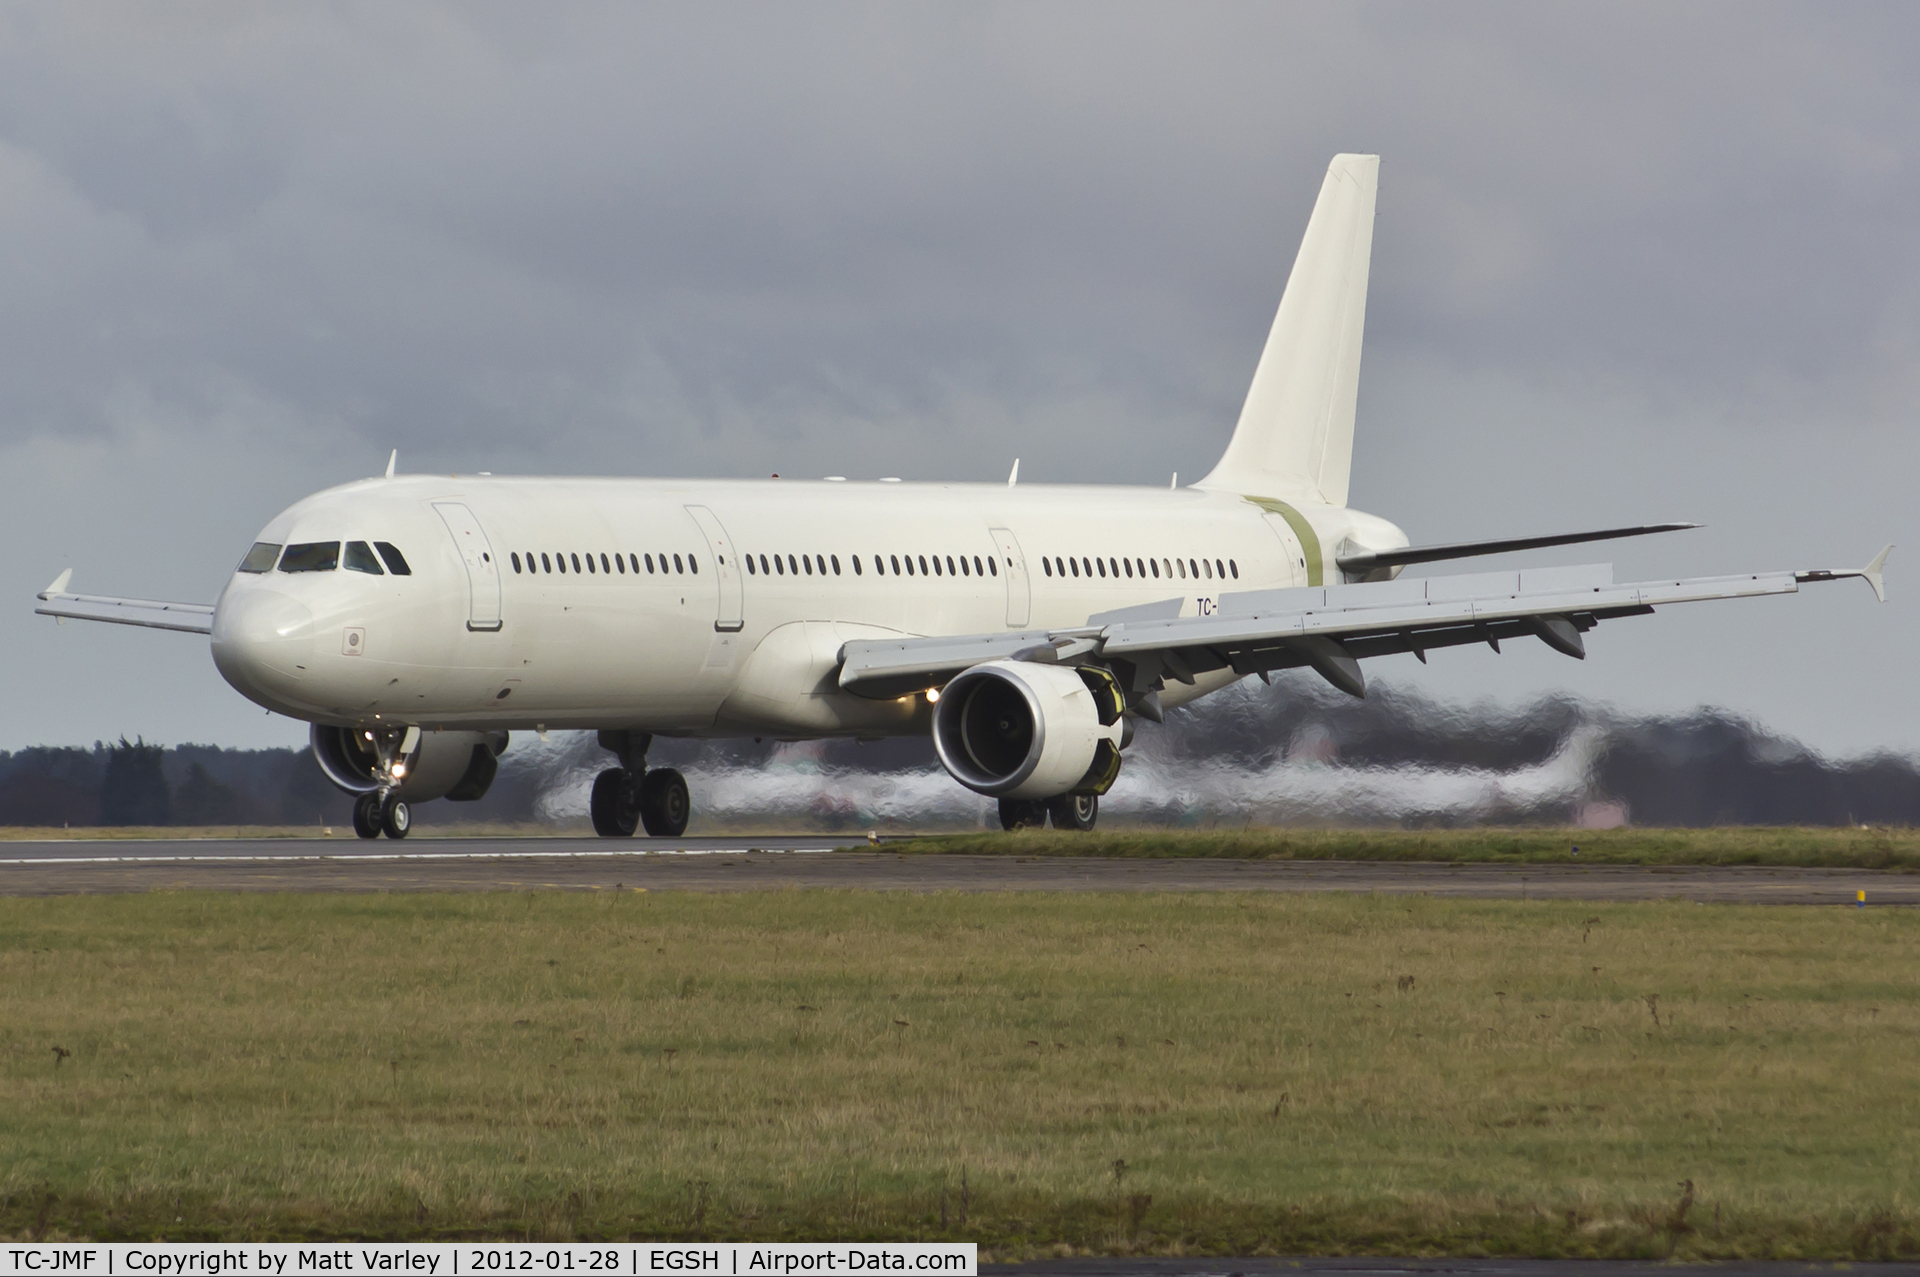 TC-JMF, 2000 Airbus A321-211 C/N 1233, Arriving at EGSH for spray into Nordwind C/S.